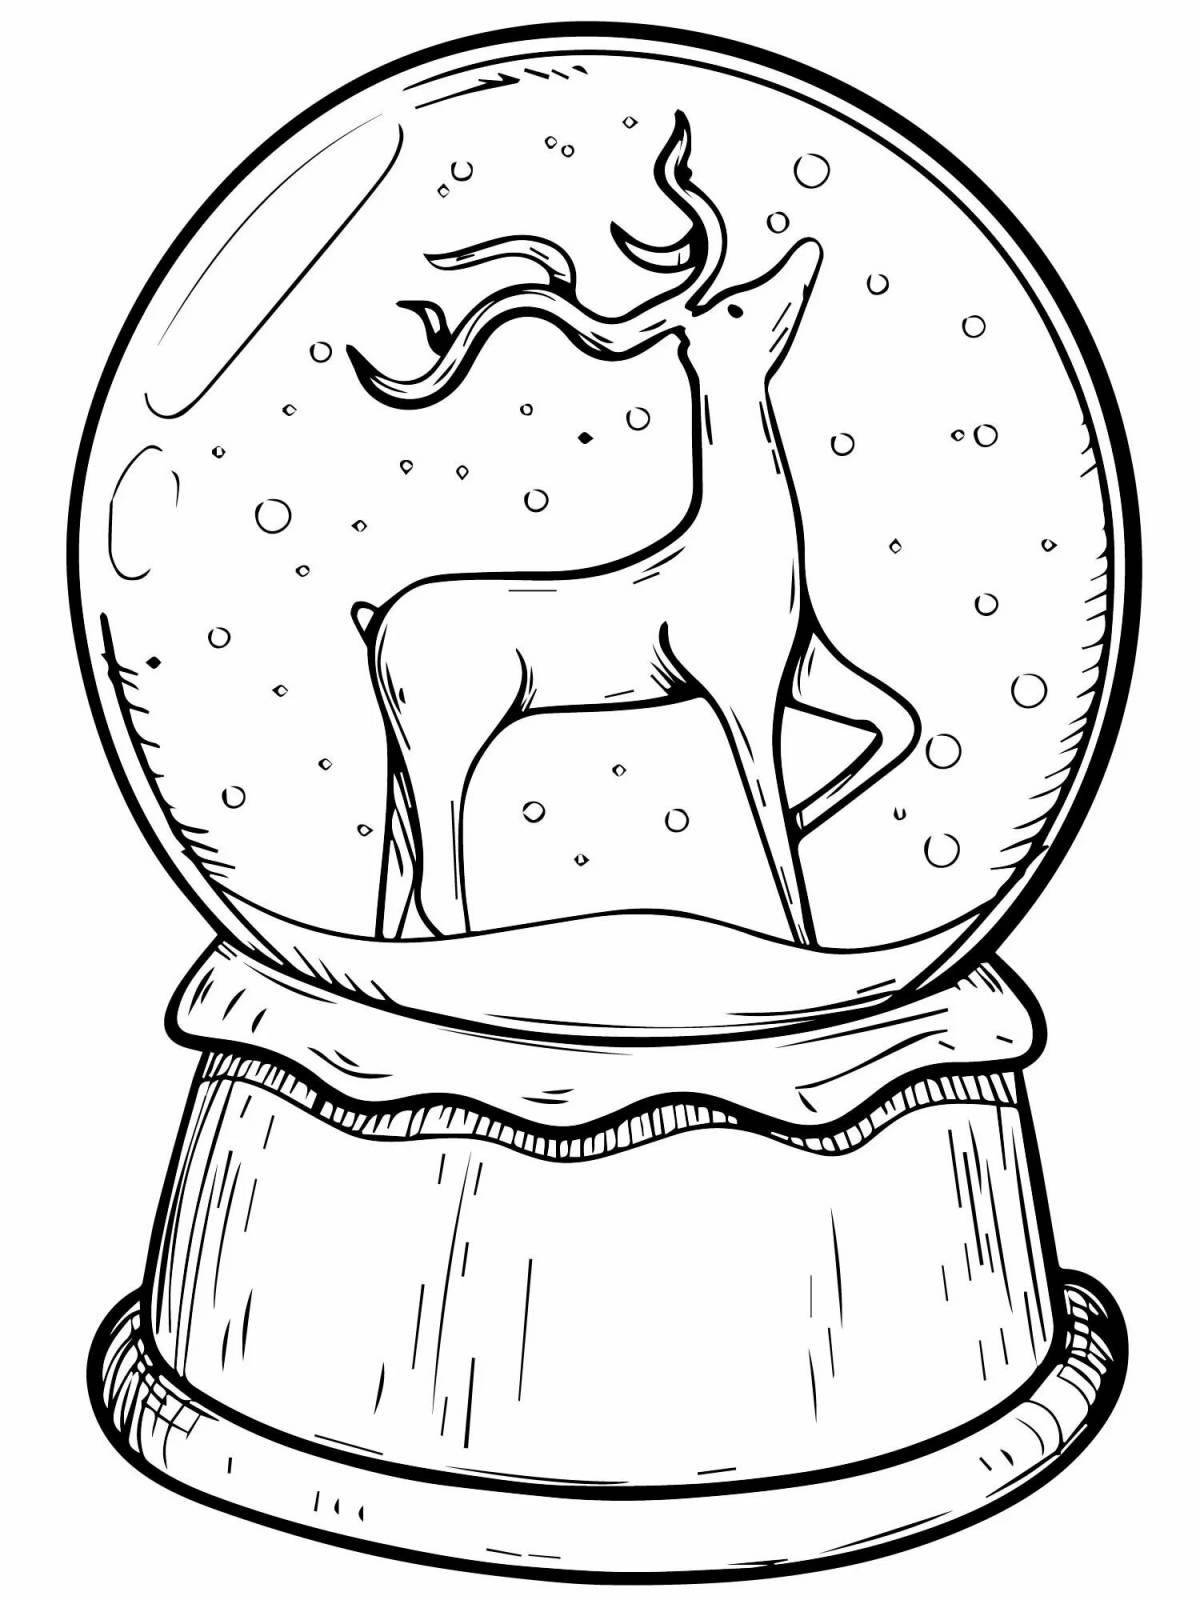 Majestic winter ball coloring page